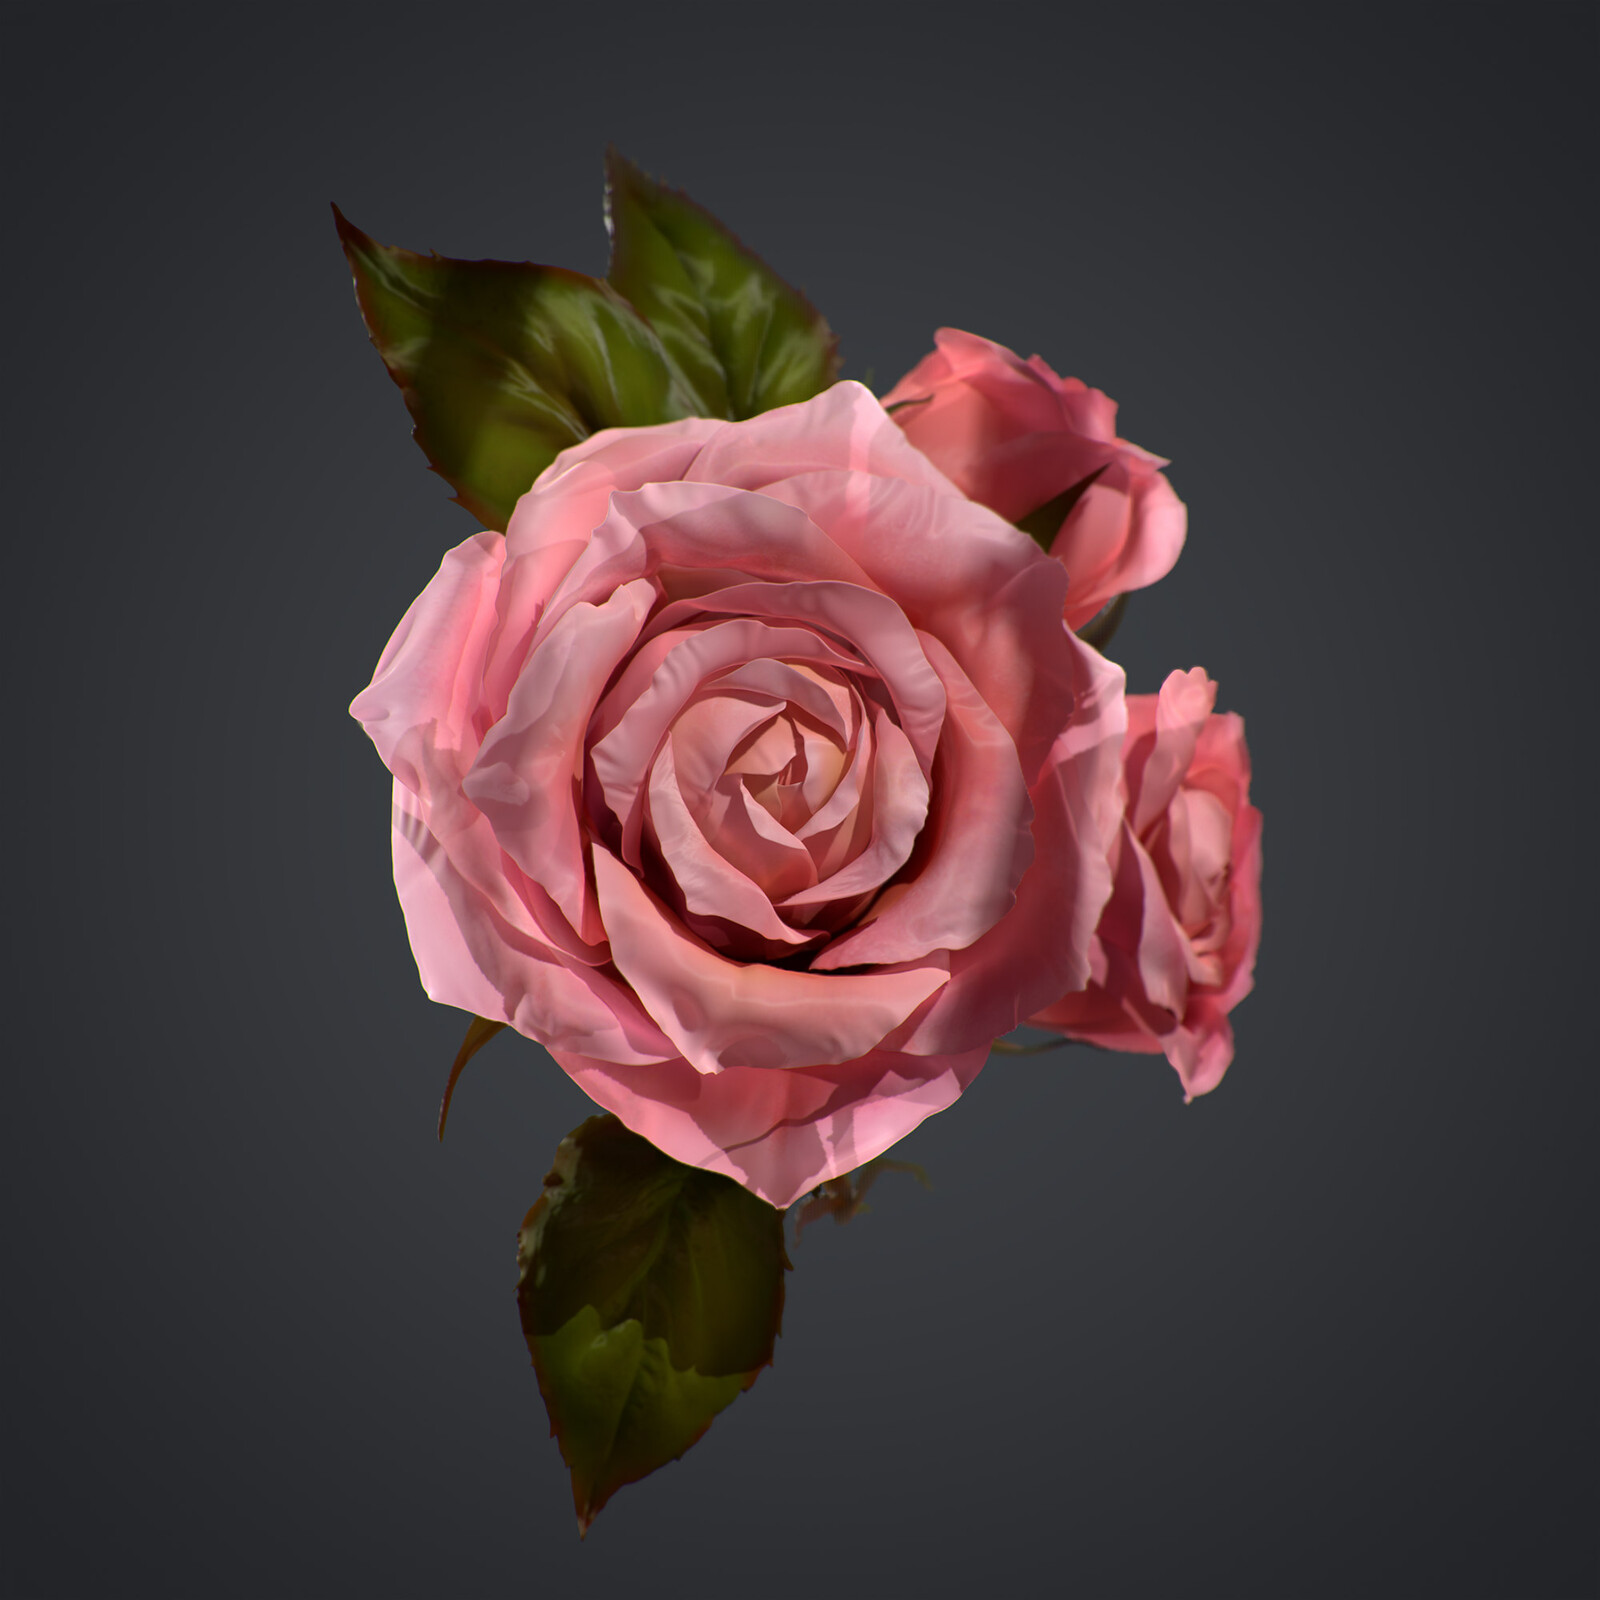 Rose - a study created to test Zbrush 2021's cloth brushes, rendered in Marmoset Toolbag 3